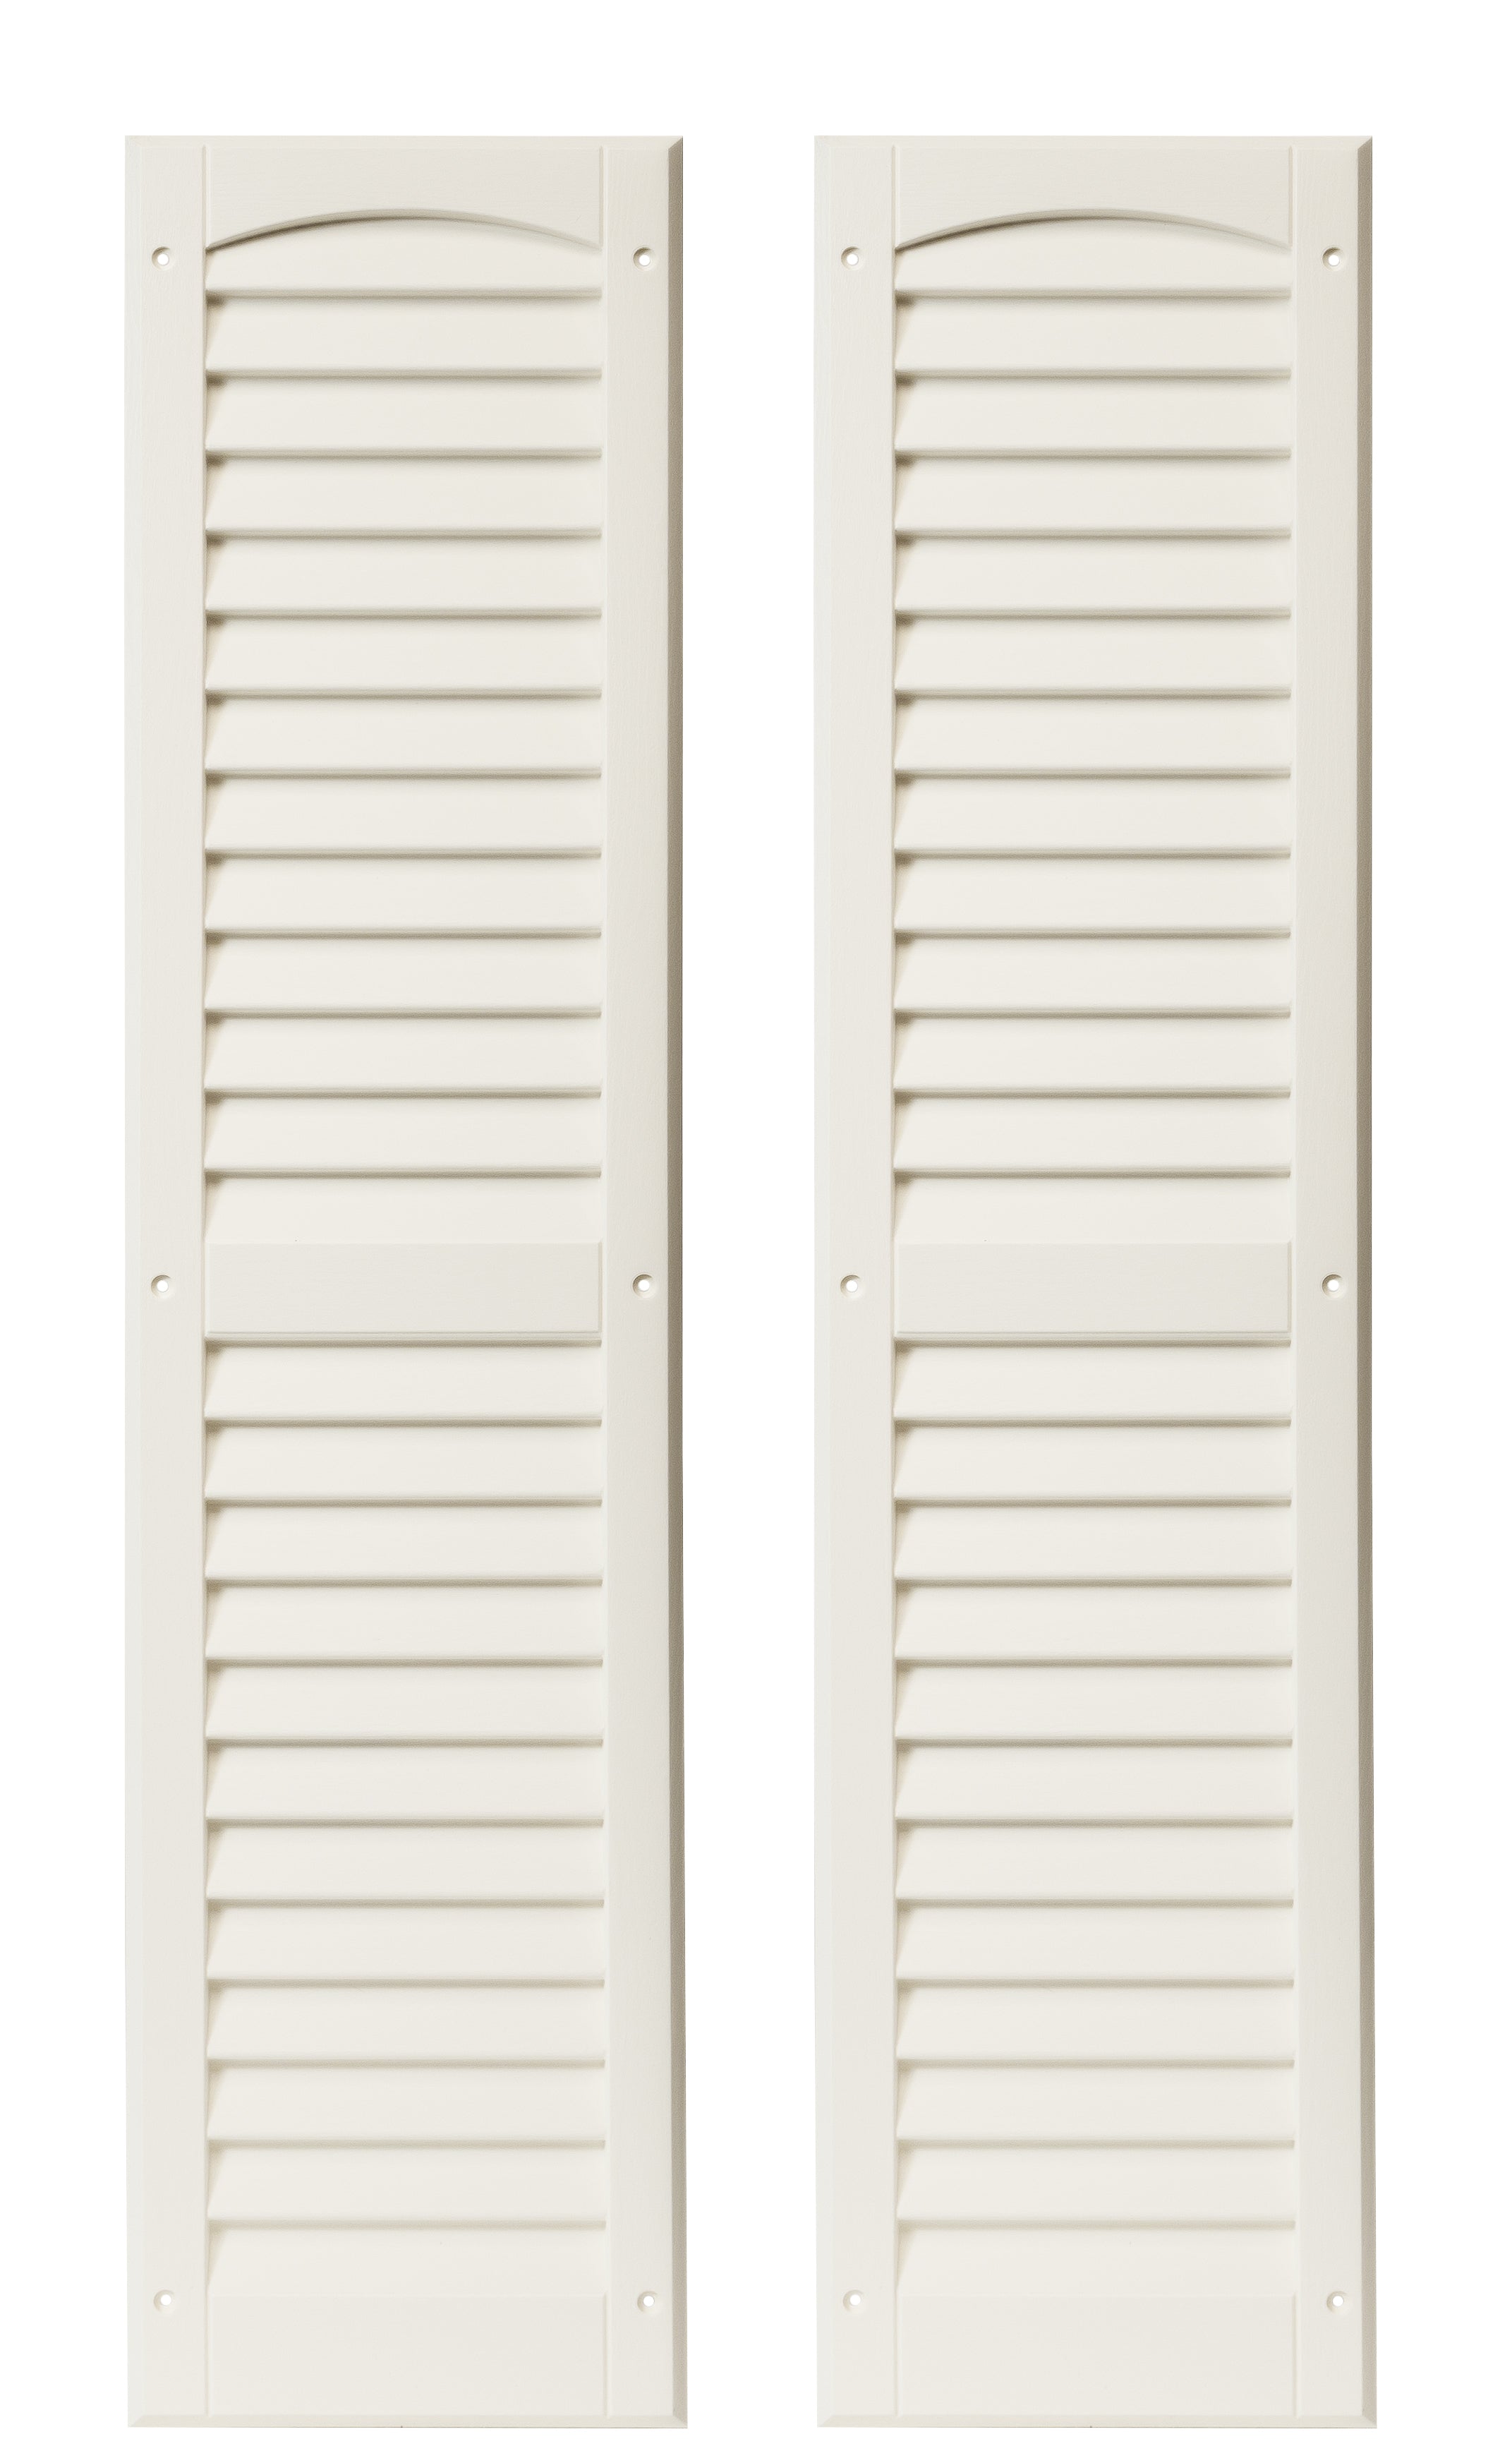 Pair of 9" W x 36" H Louvered Paintable Shutters for Sheds, Playhouses, and MORE 